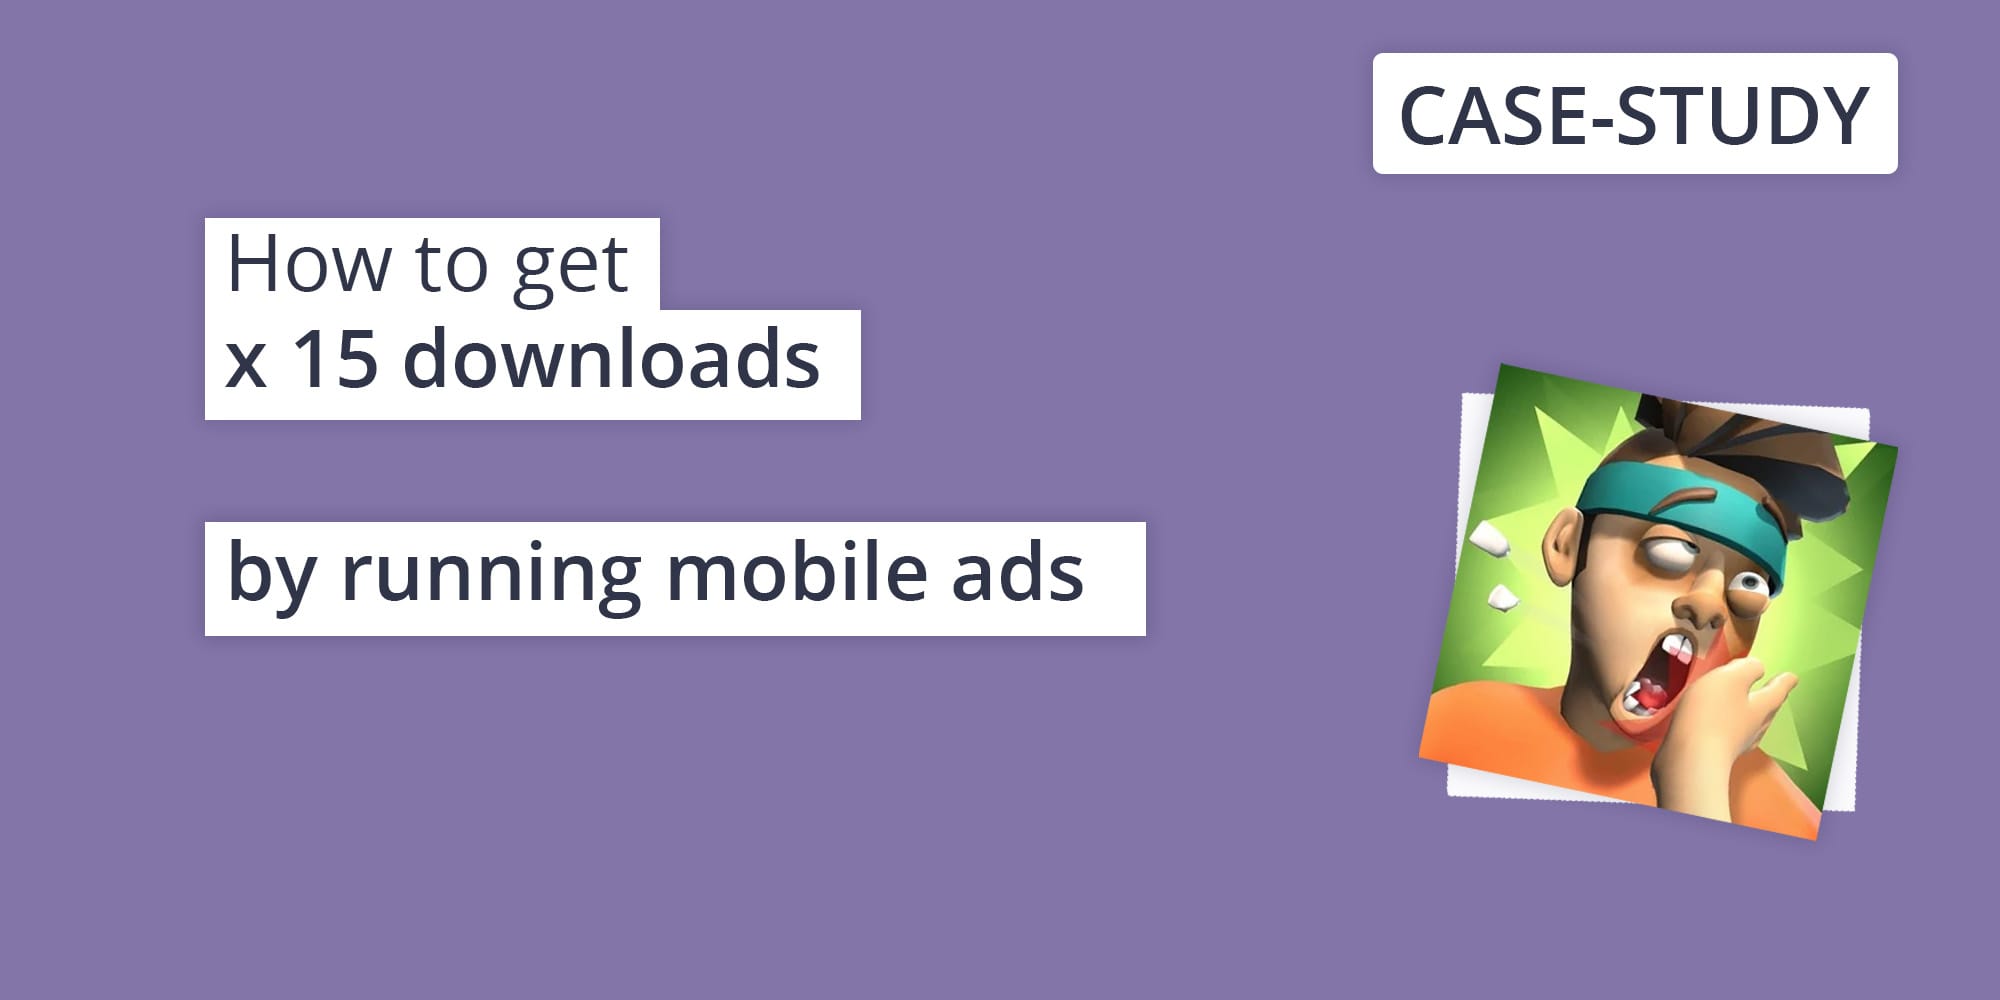 How running mobile ads can help you increase downloads x15